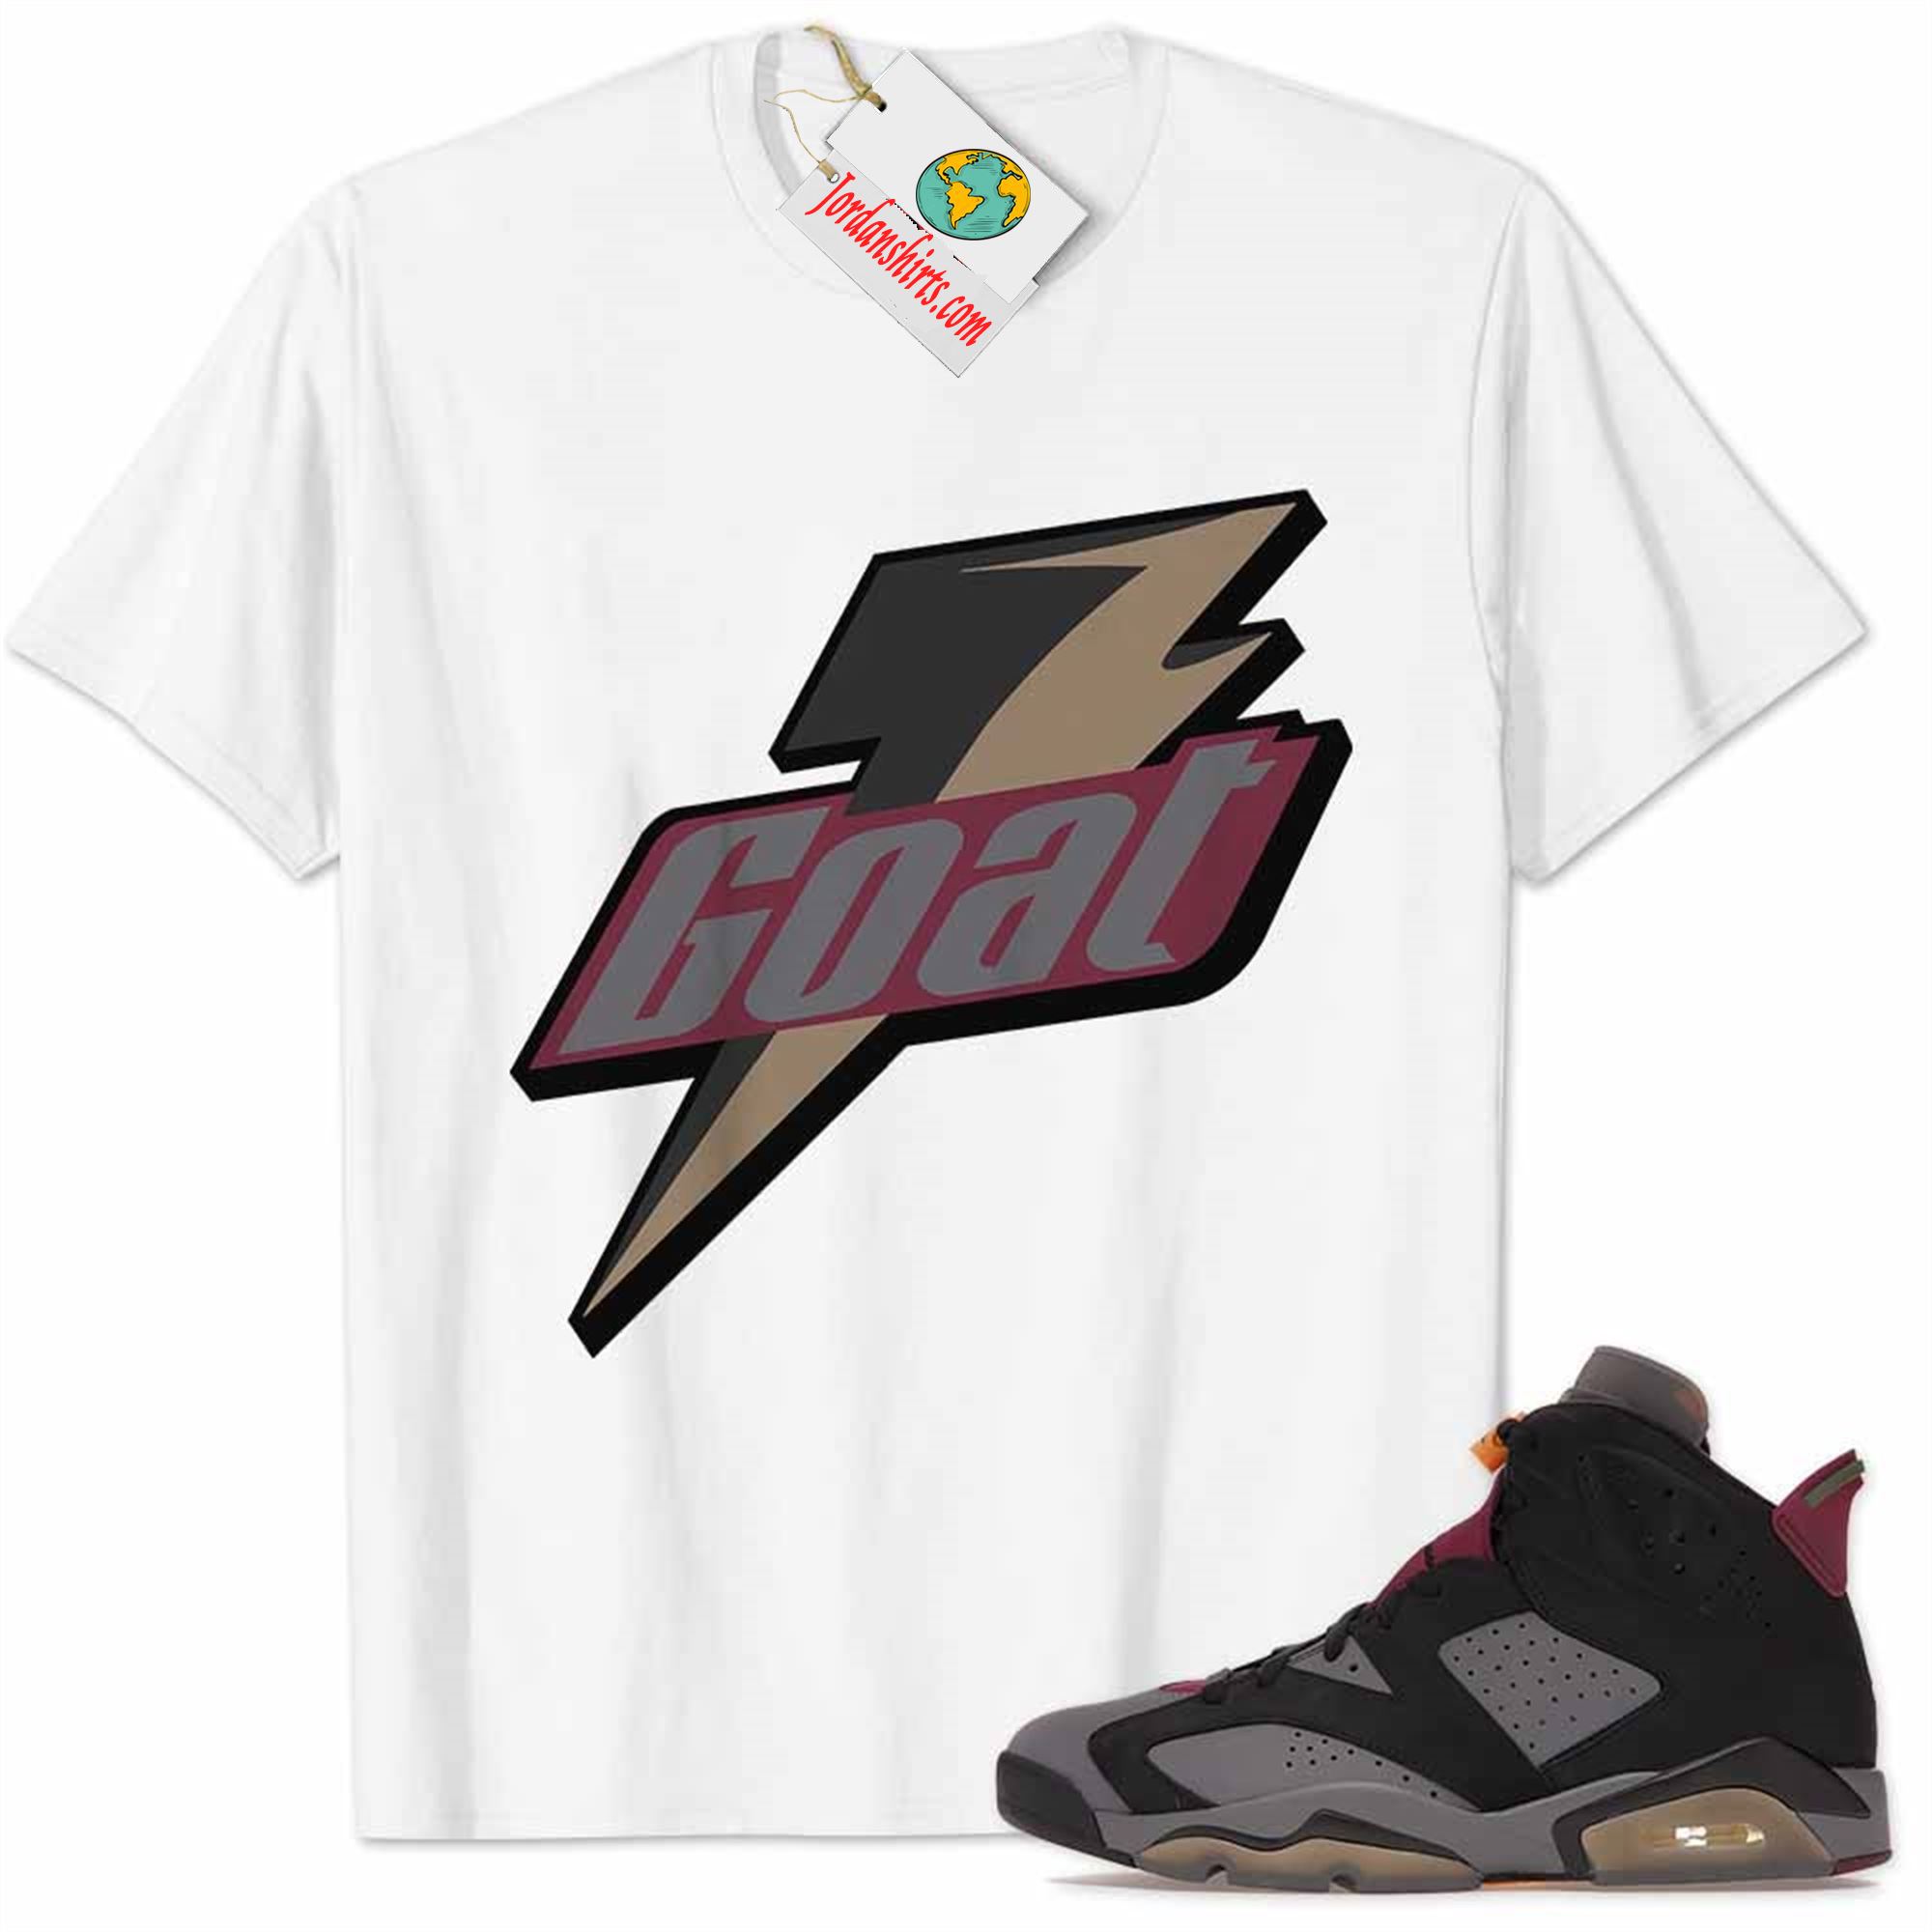 Jordan 6 Shirt, Bordeaux 6s Shirt Goat Greatest Of All Time White Size Up To 5xl